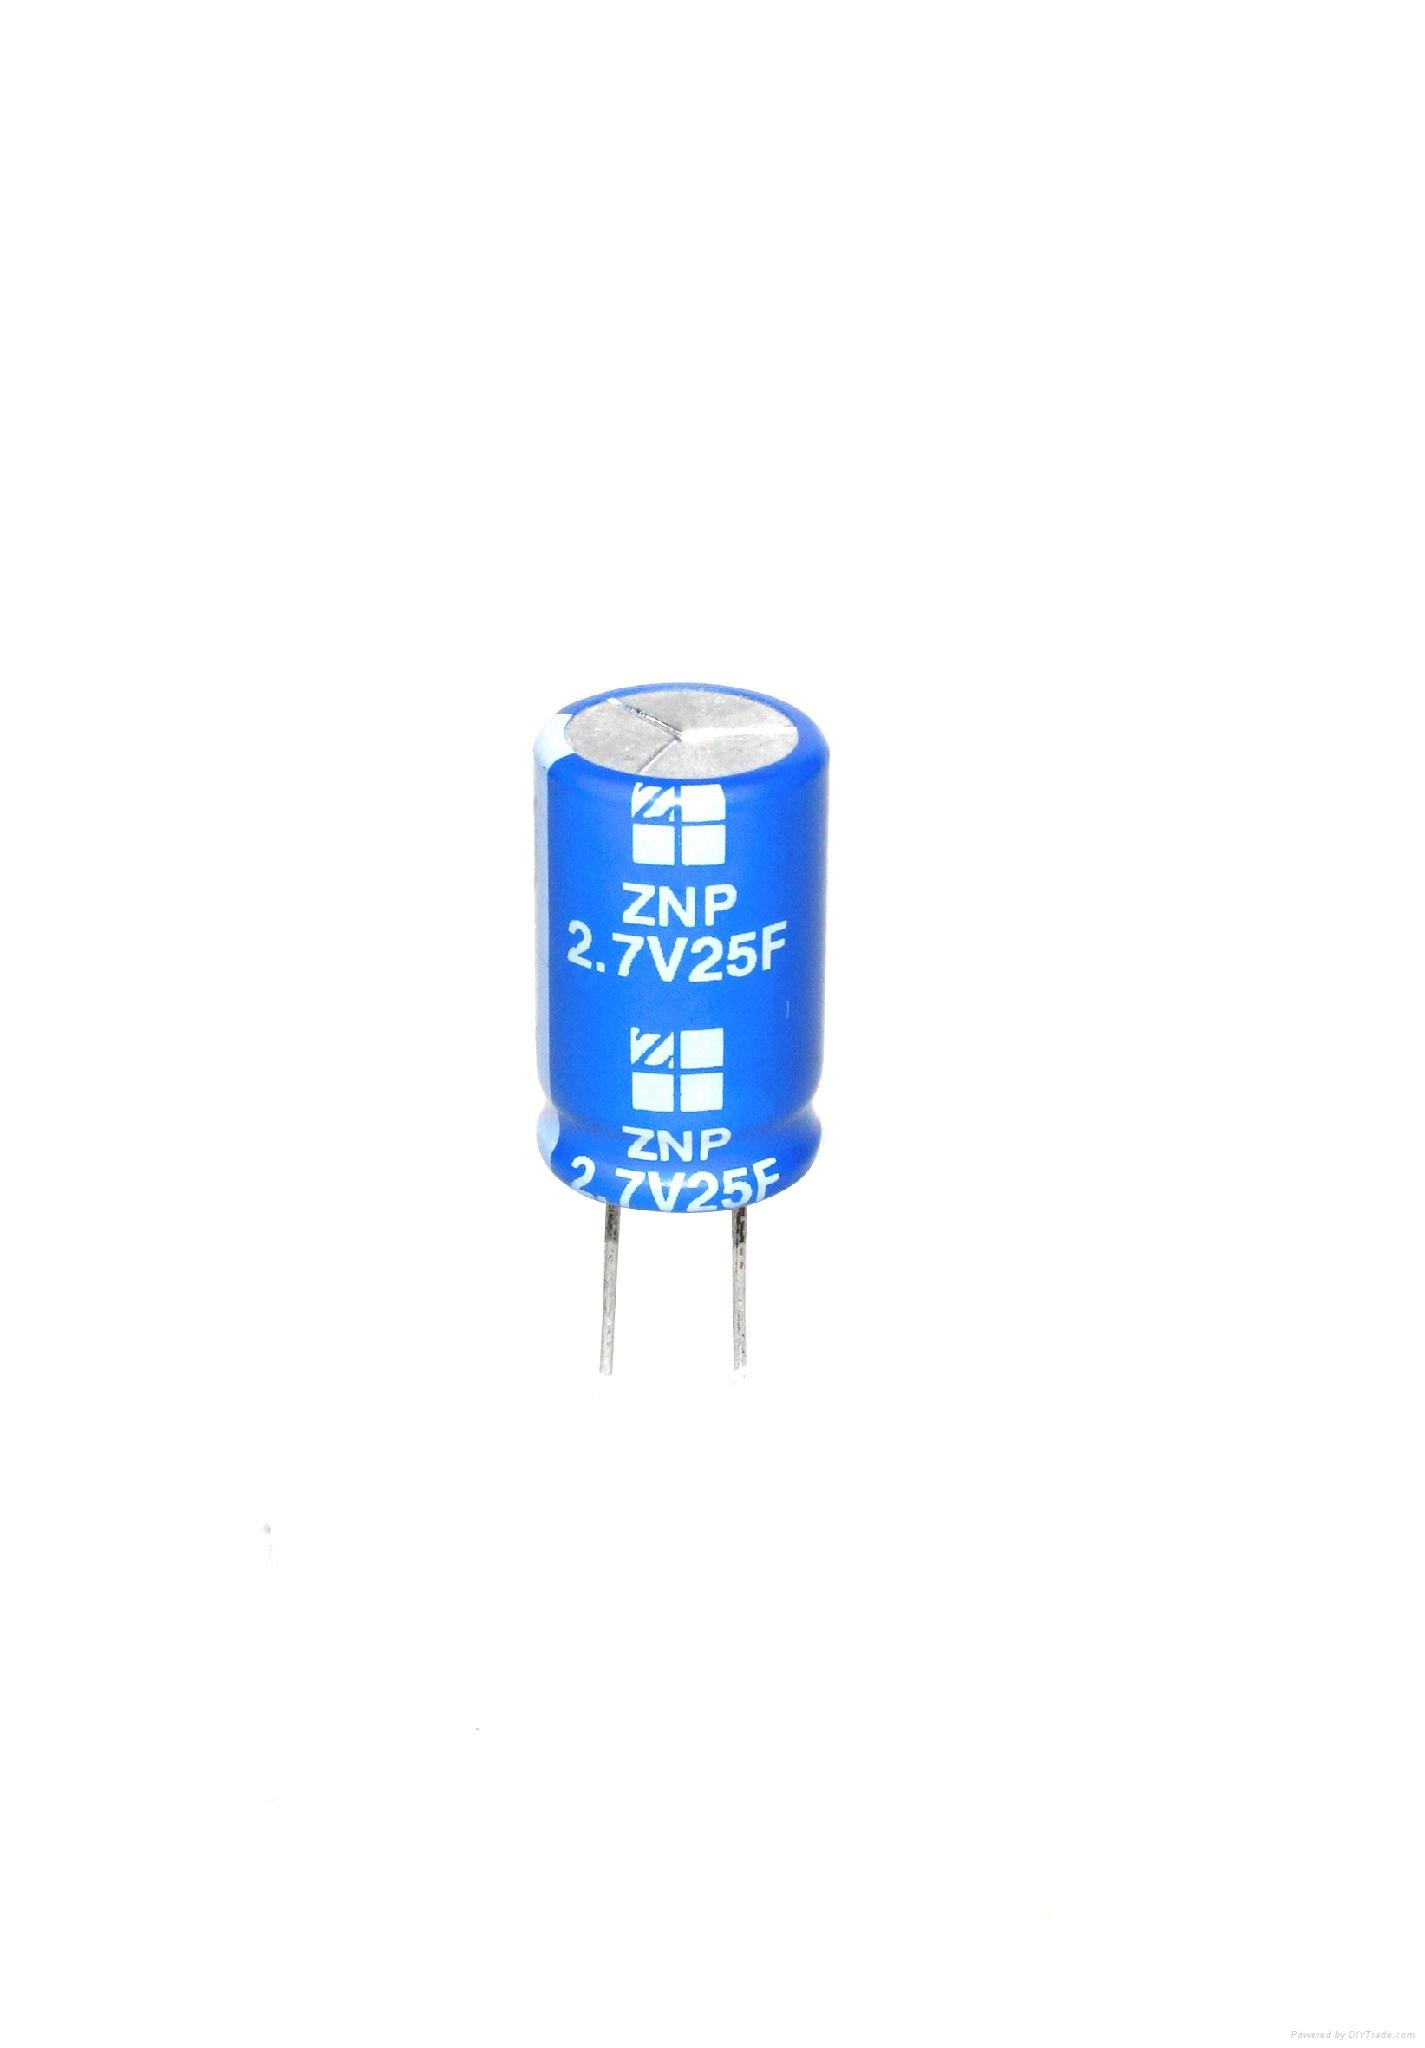 2.7V 5F EDLC Manufacturer Electric Double Layer Capacitor 4